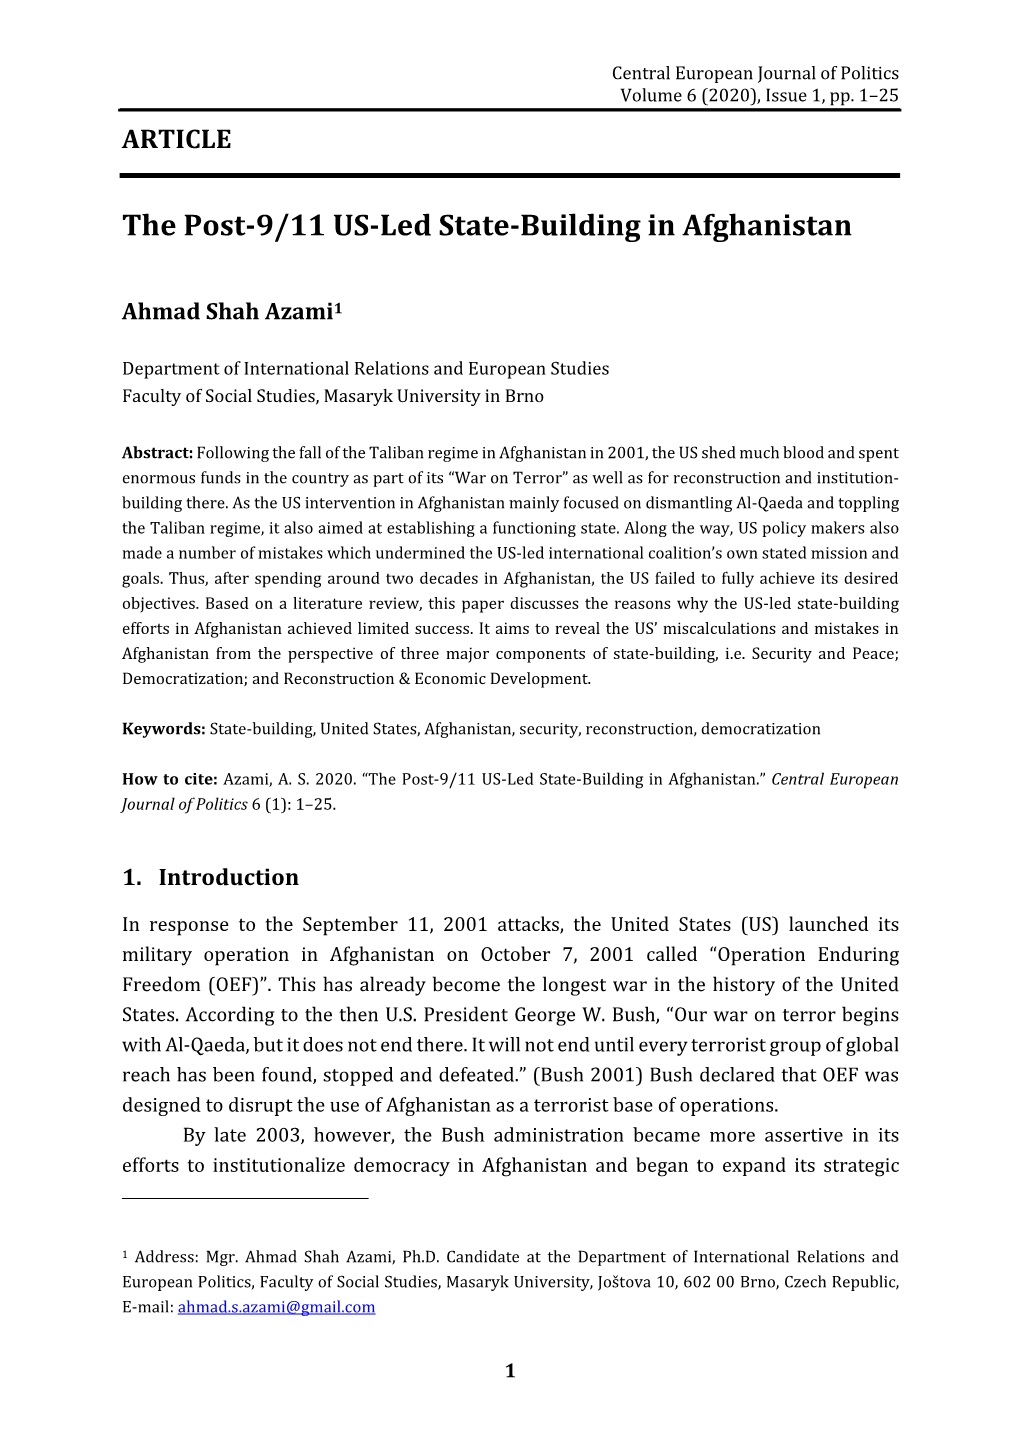 The Post-9/11 US-Led State-Building in Afghanistan